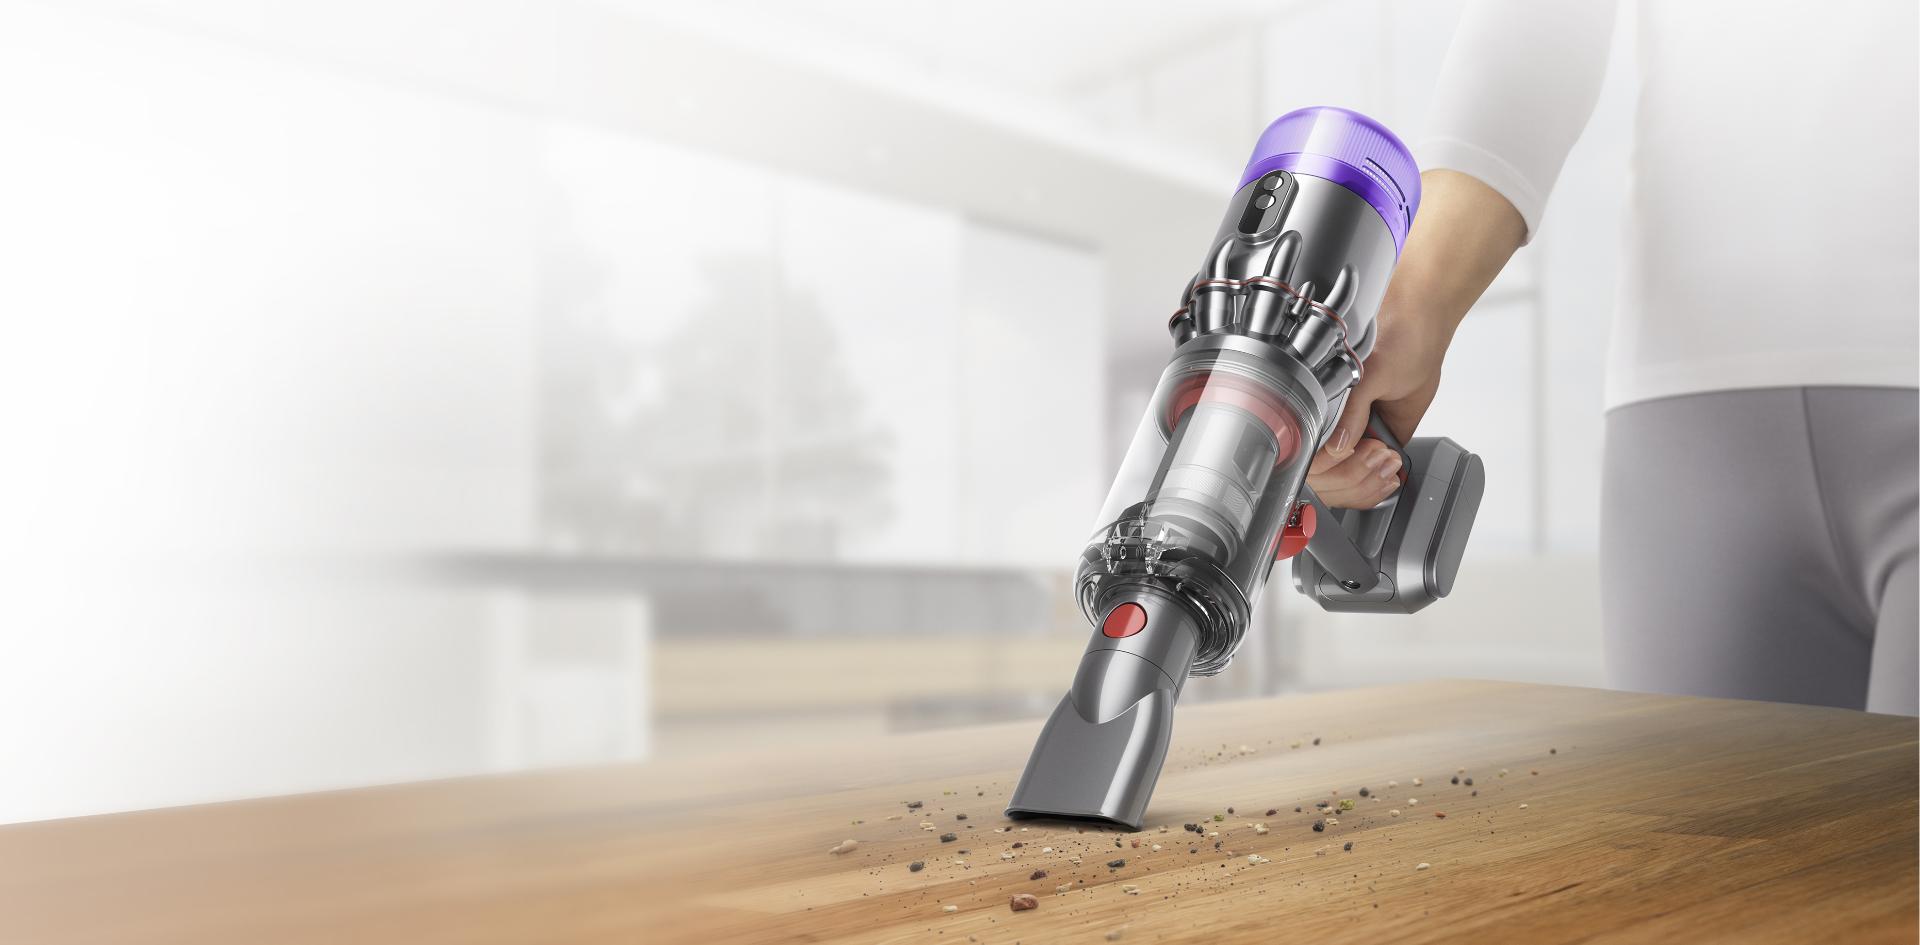 Dyson Humdinger cleaning debris from table